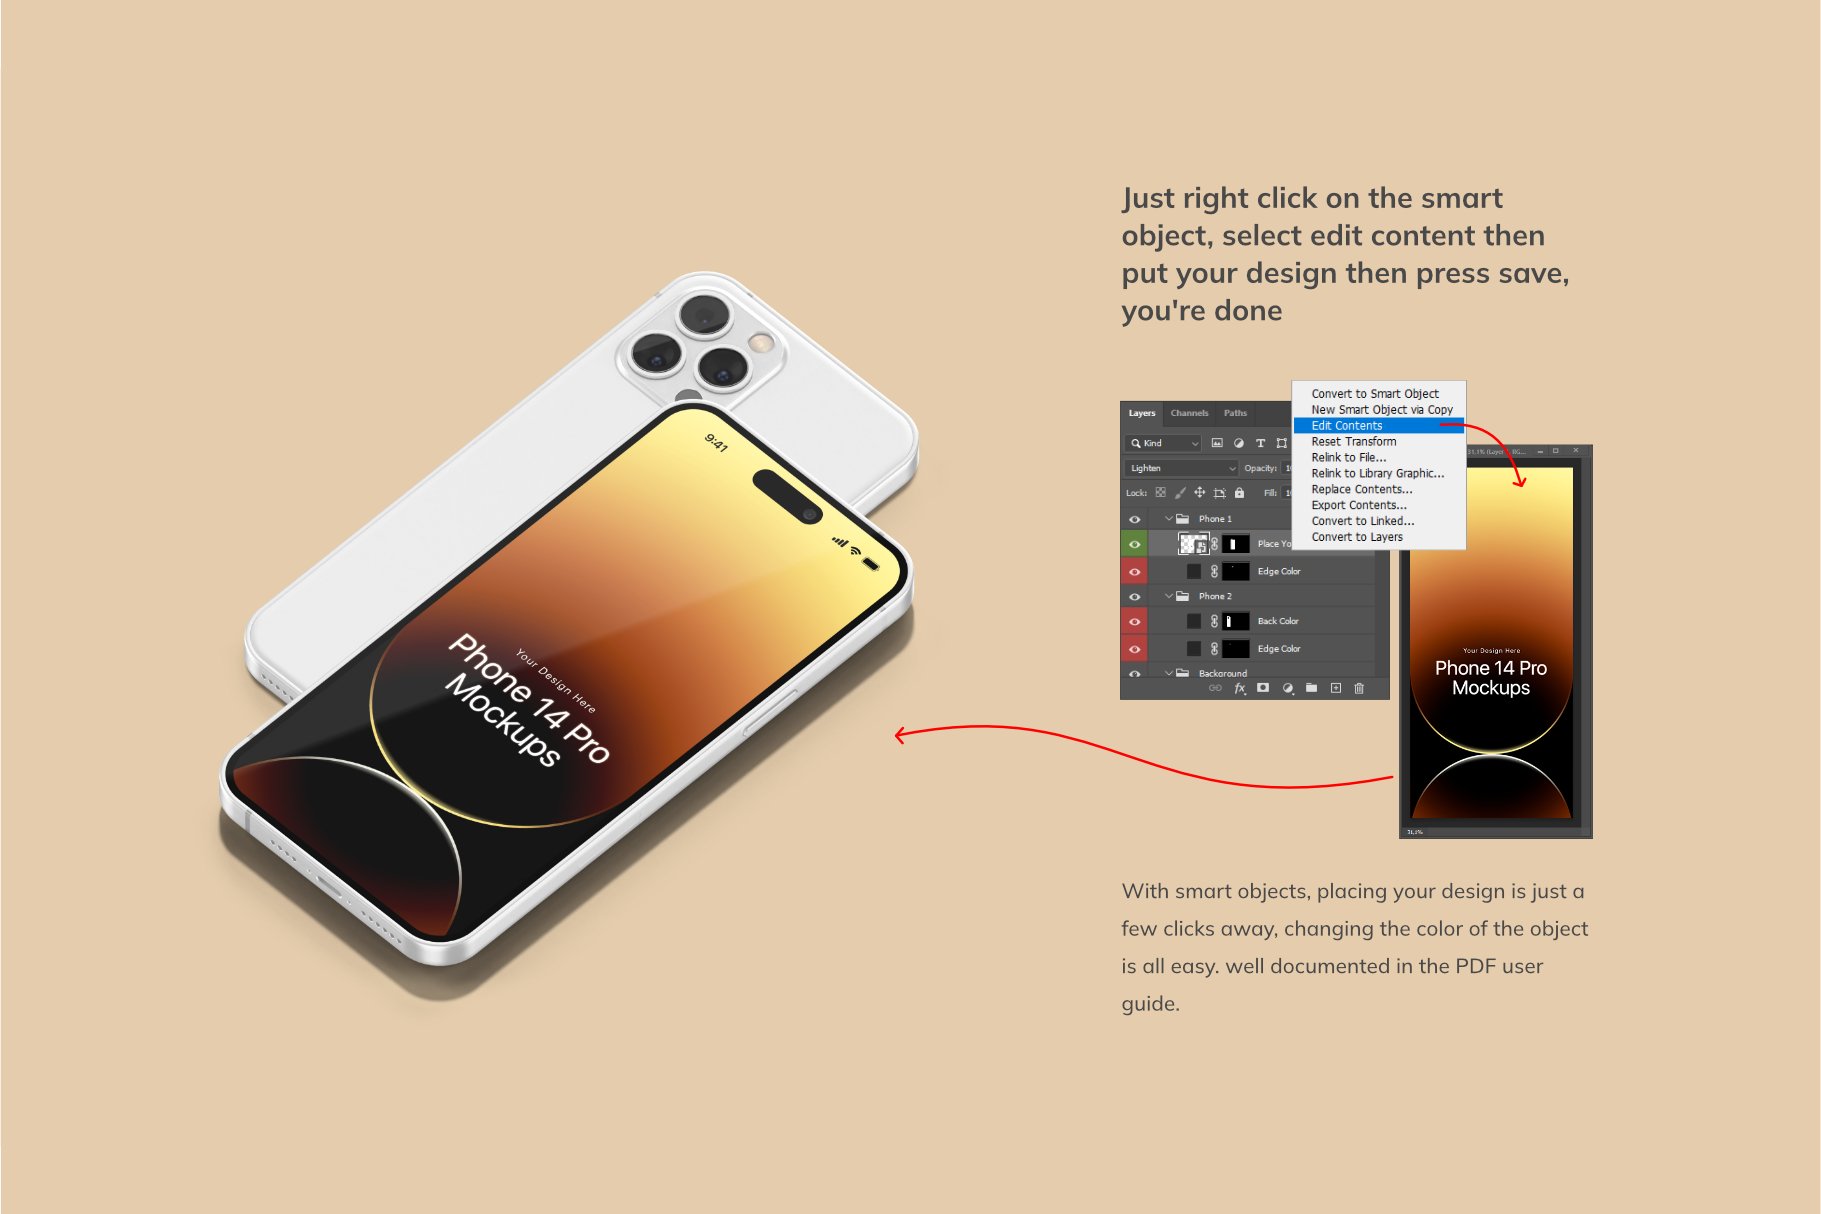 Phone 14 Pro Mockups preview image.